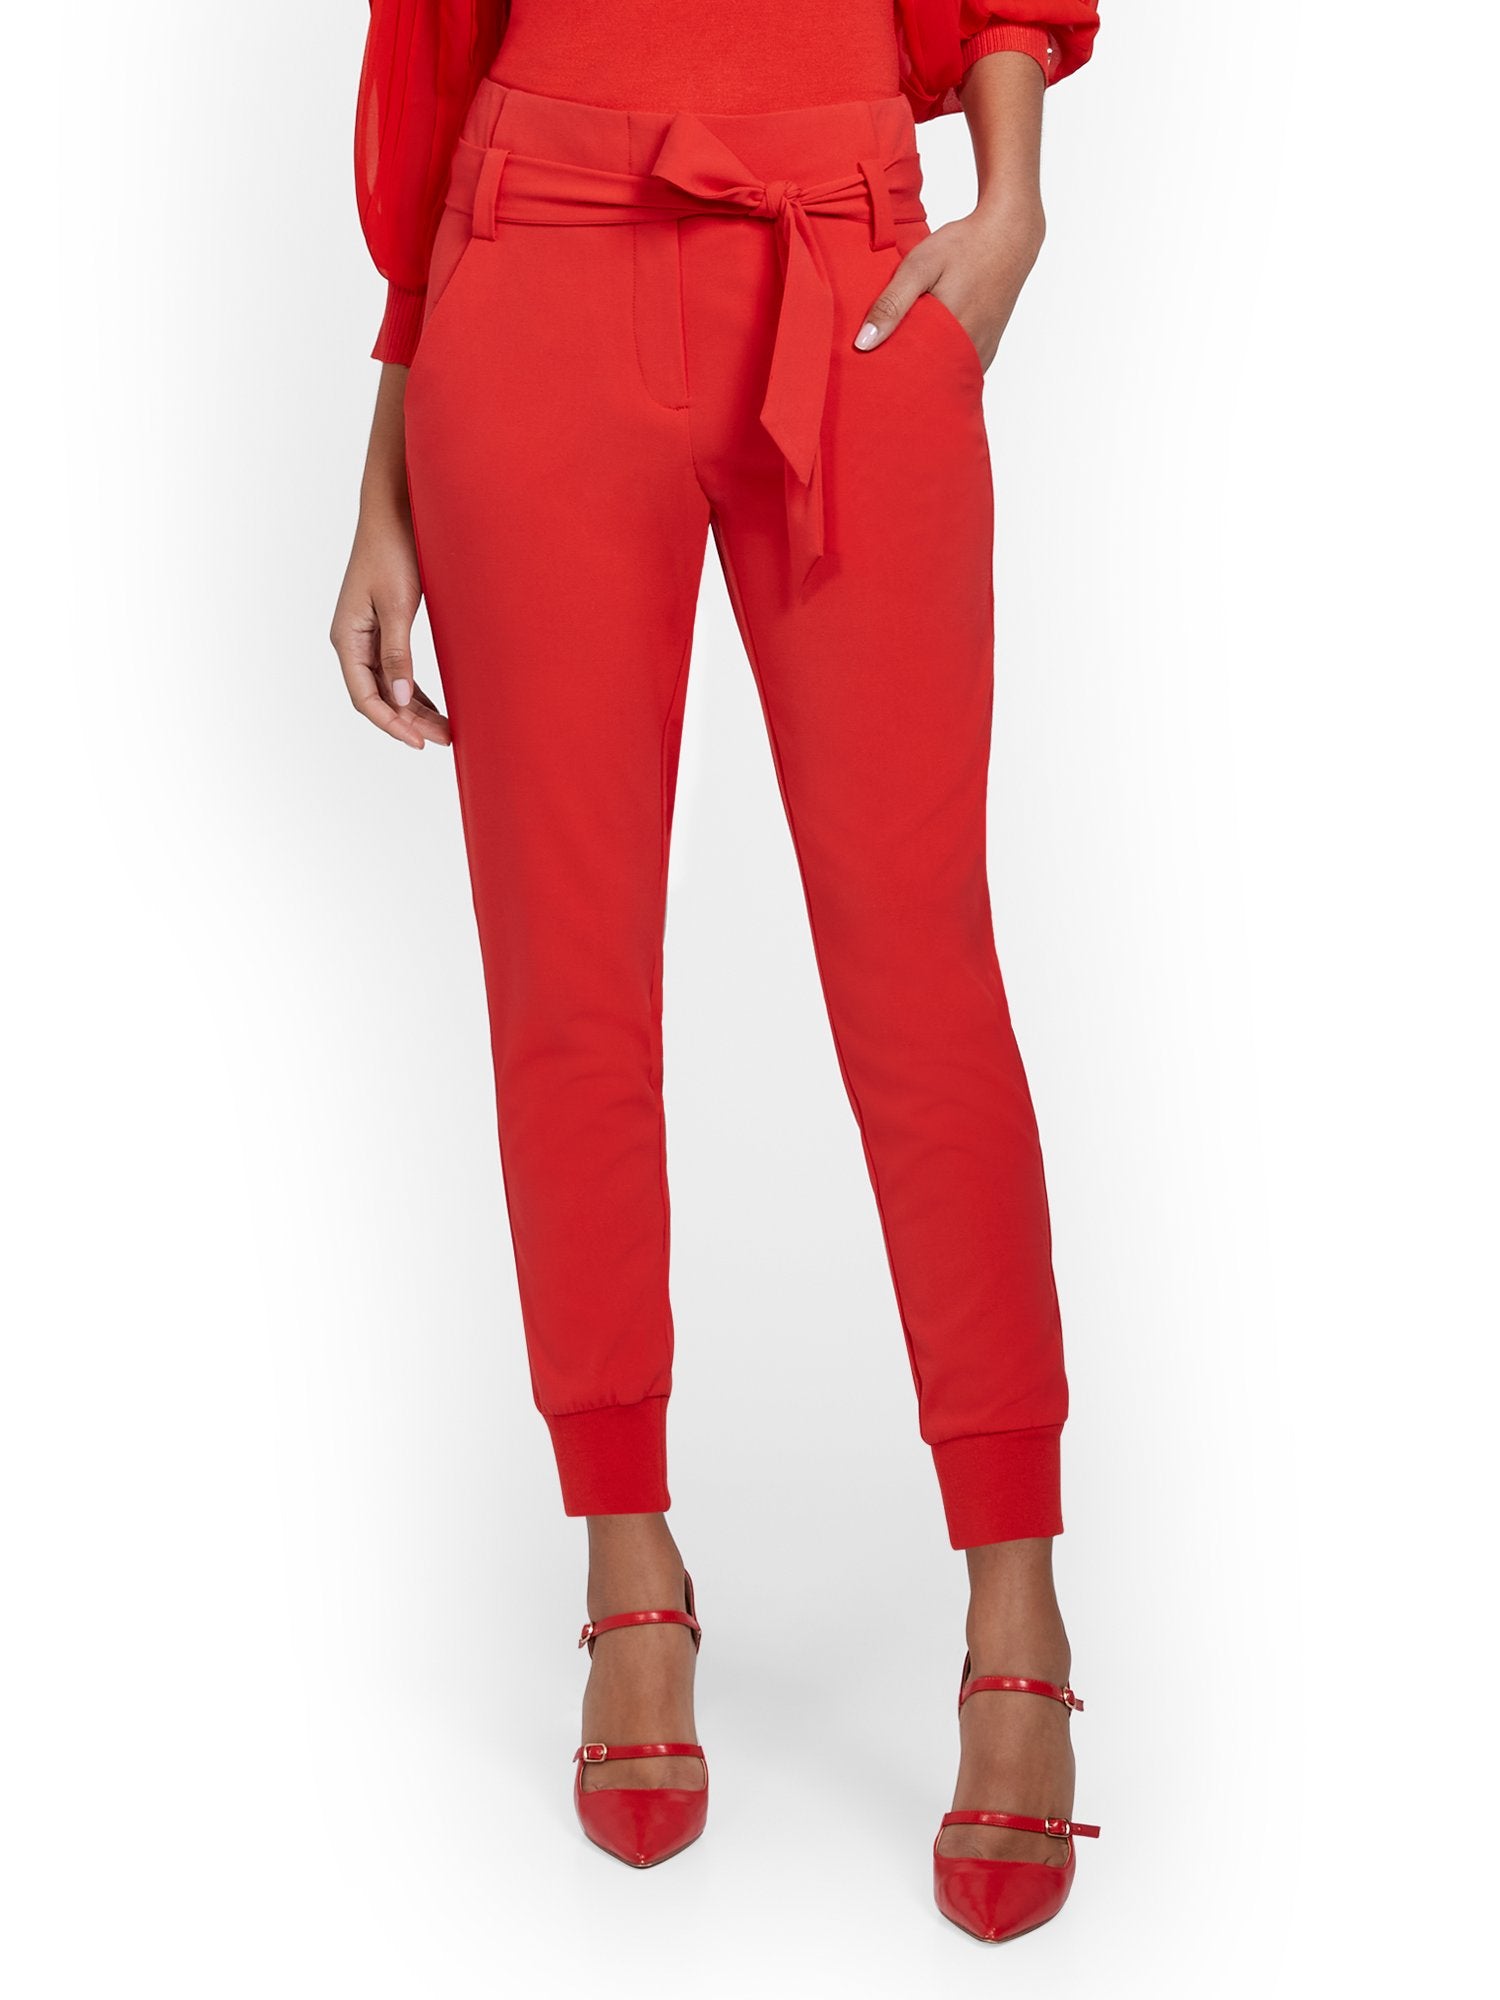 Never Fully Dressed knitted jogger co-ord with tie waist in red